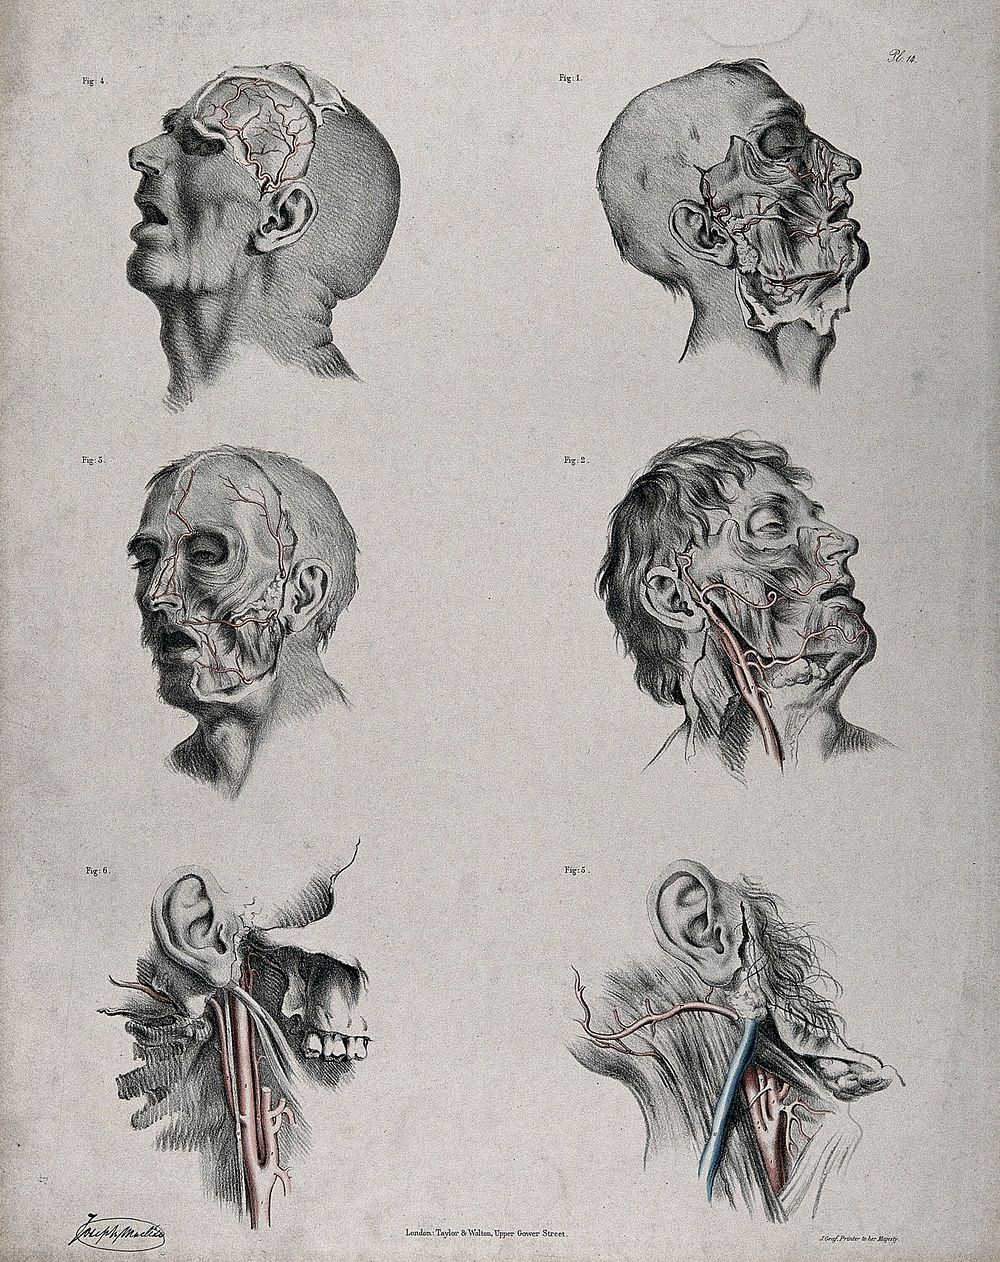 The circulatory system: six dissections of the male face and neck, with arteries, blood vessels and veins indicated in red…